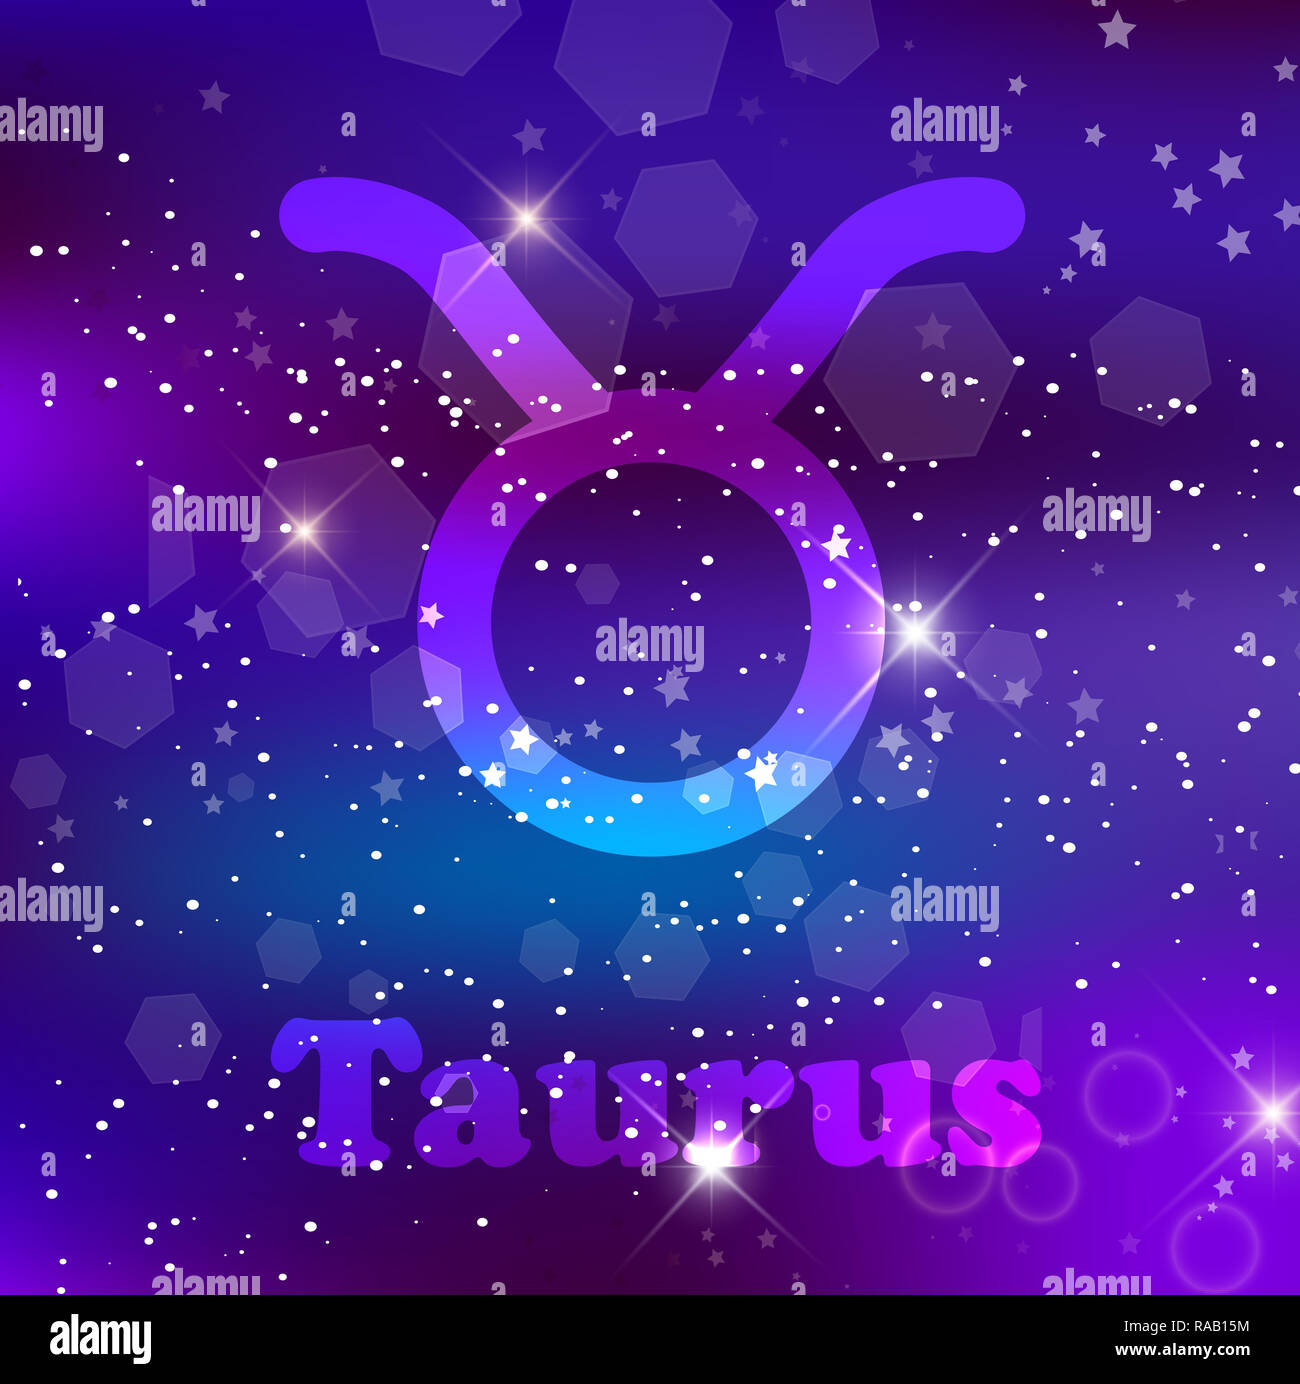 Taurus Zodiac sign and constellation on a cosmic purple background ...